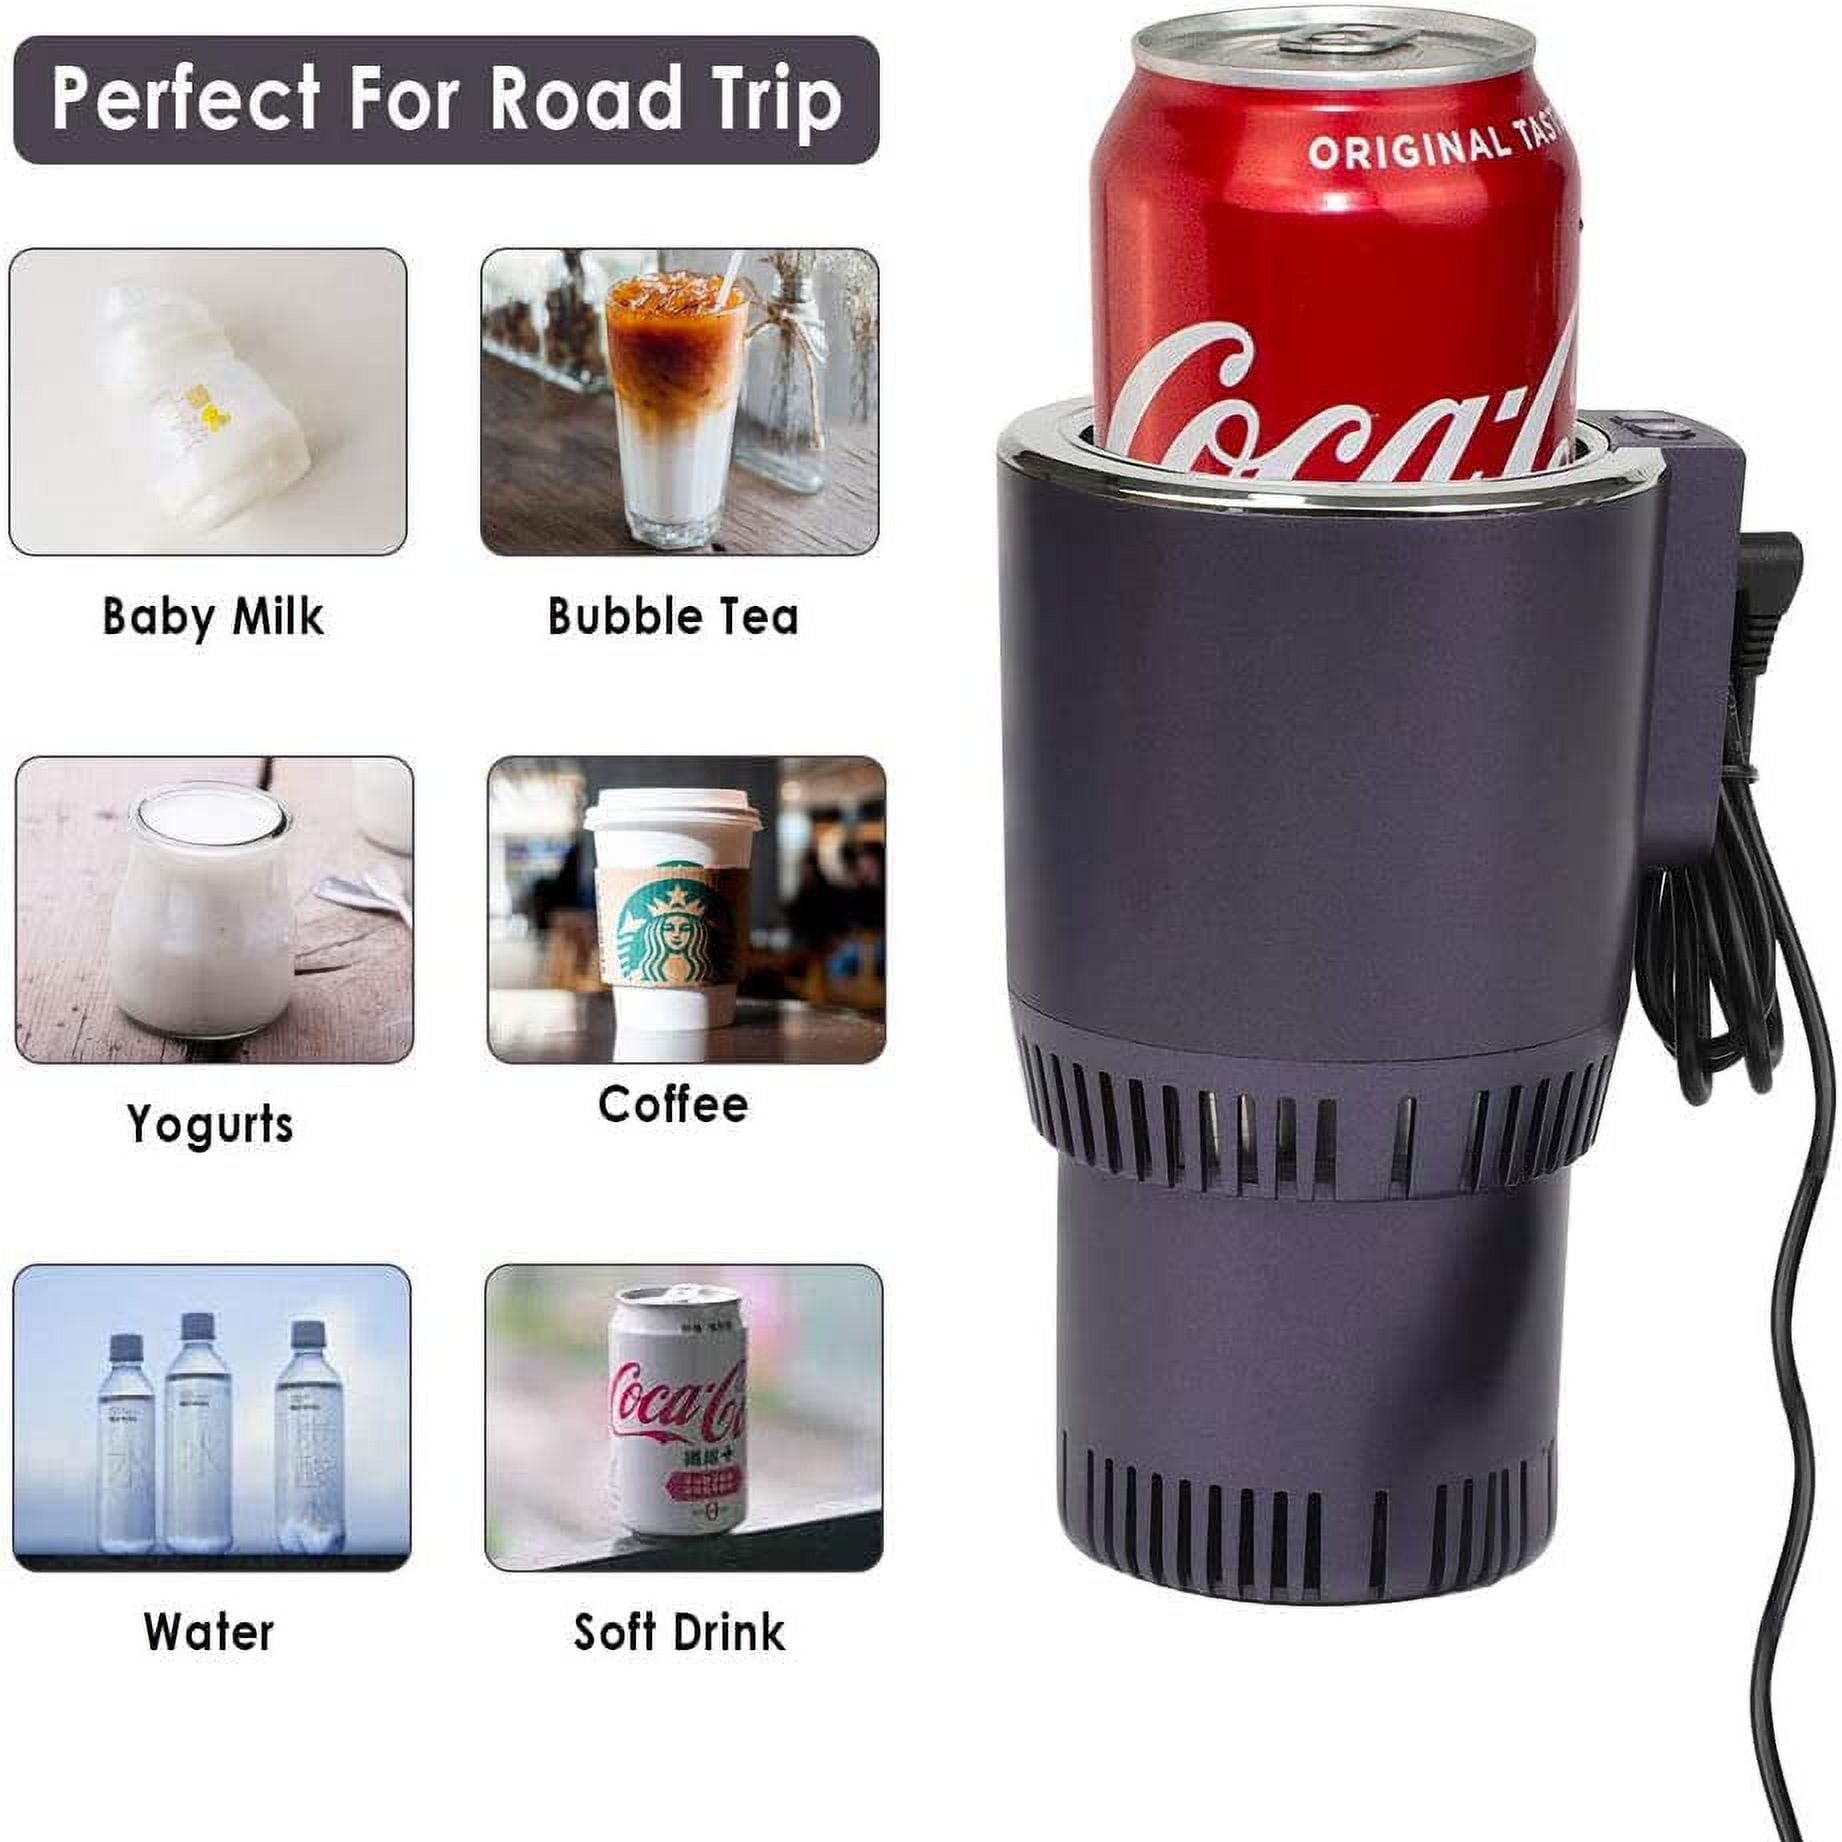 2 In 1 Fast Cooling Cup Heater Cup Mini Refrigerator Electric Cooler Pop  Cans Beverage Coffee Milk Warmer Mug Cooler Cup Home